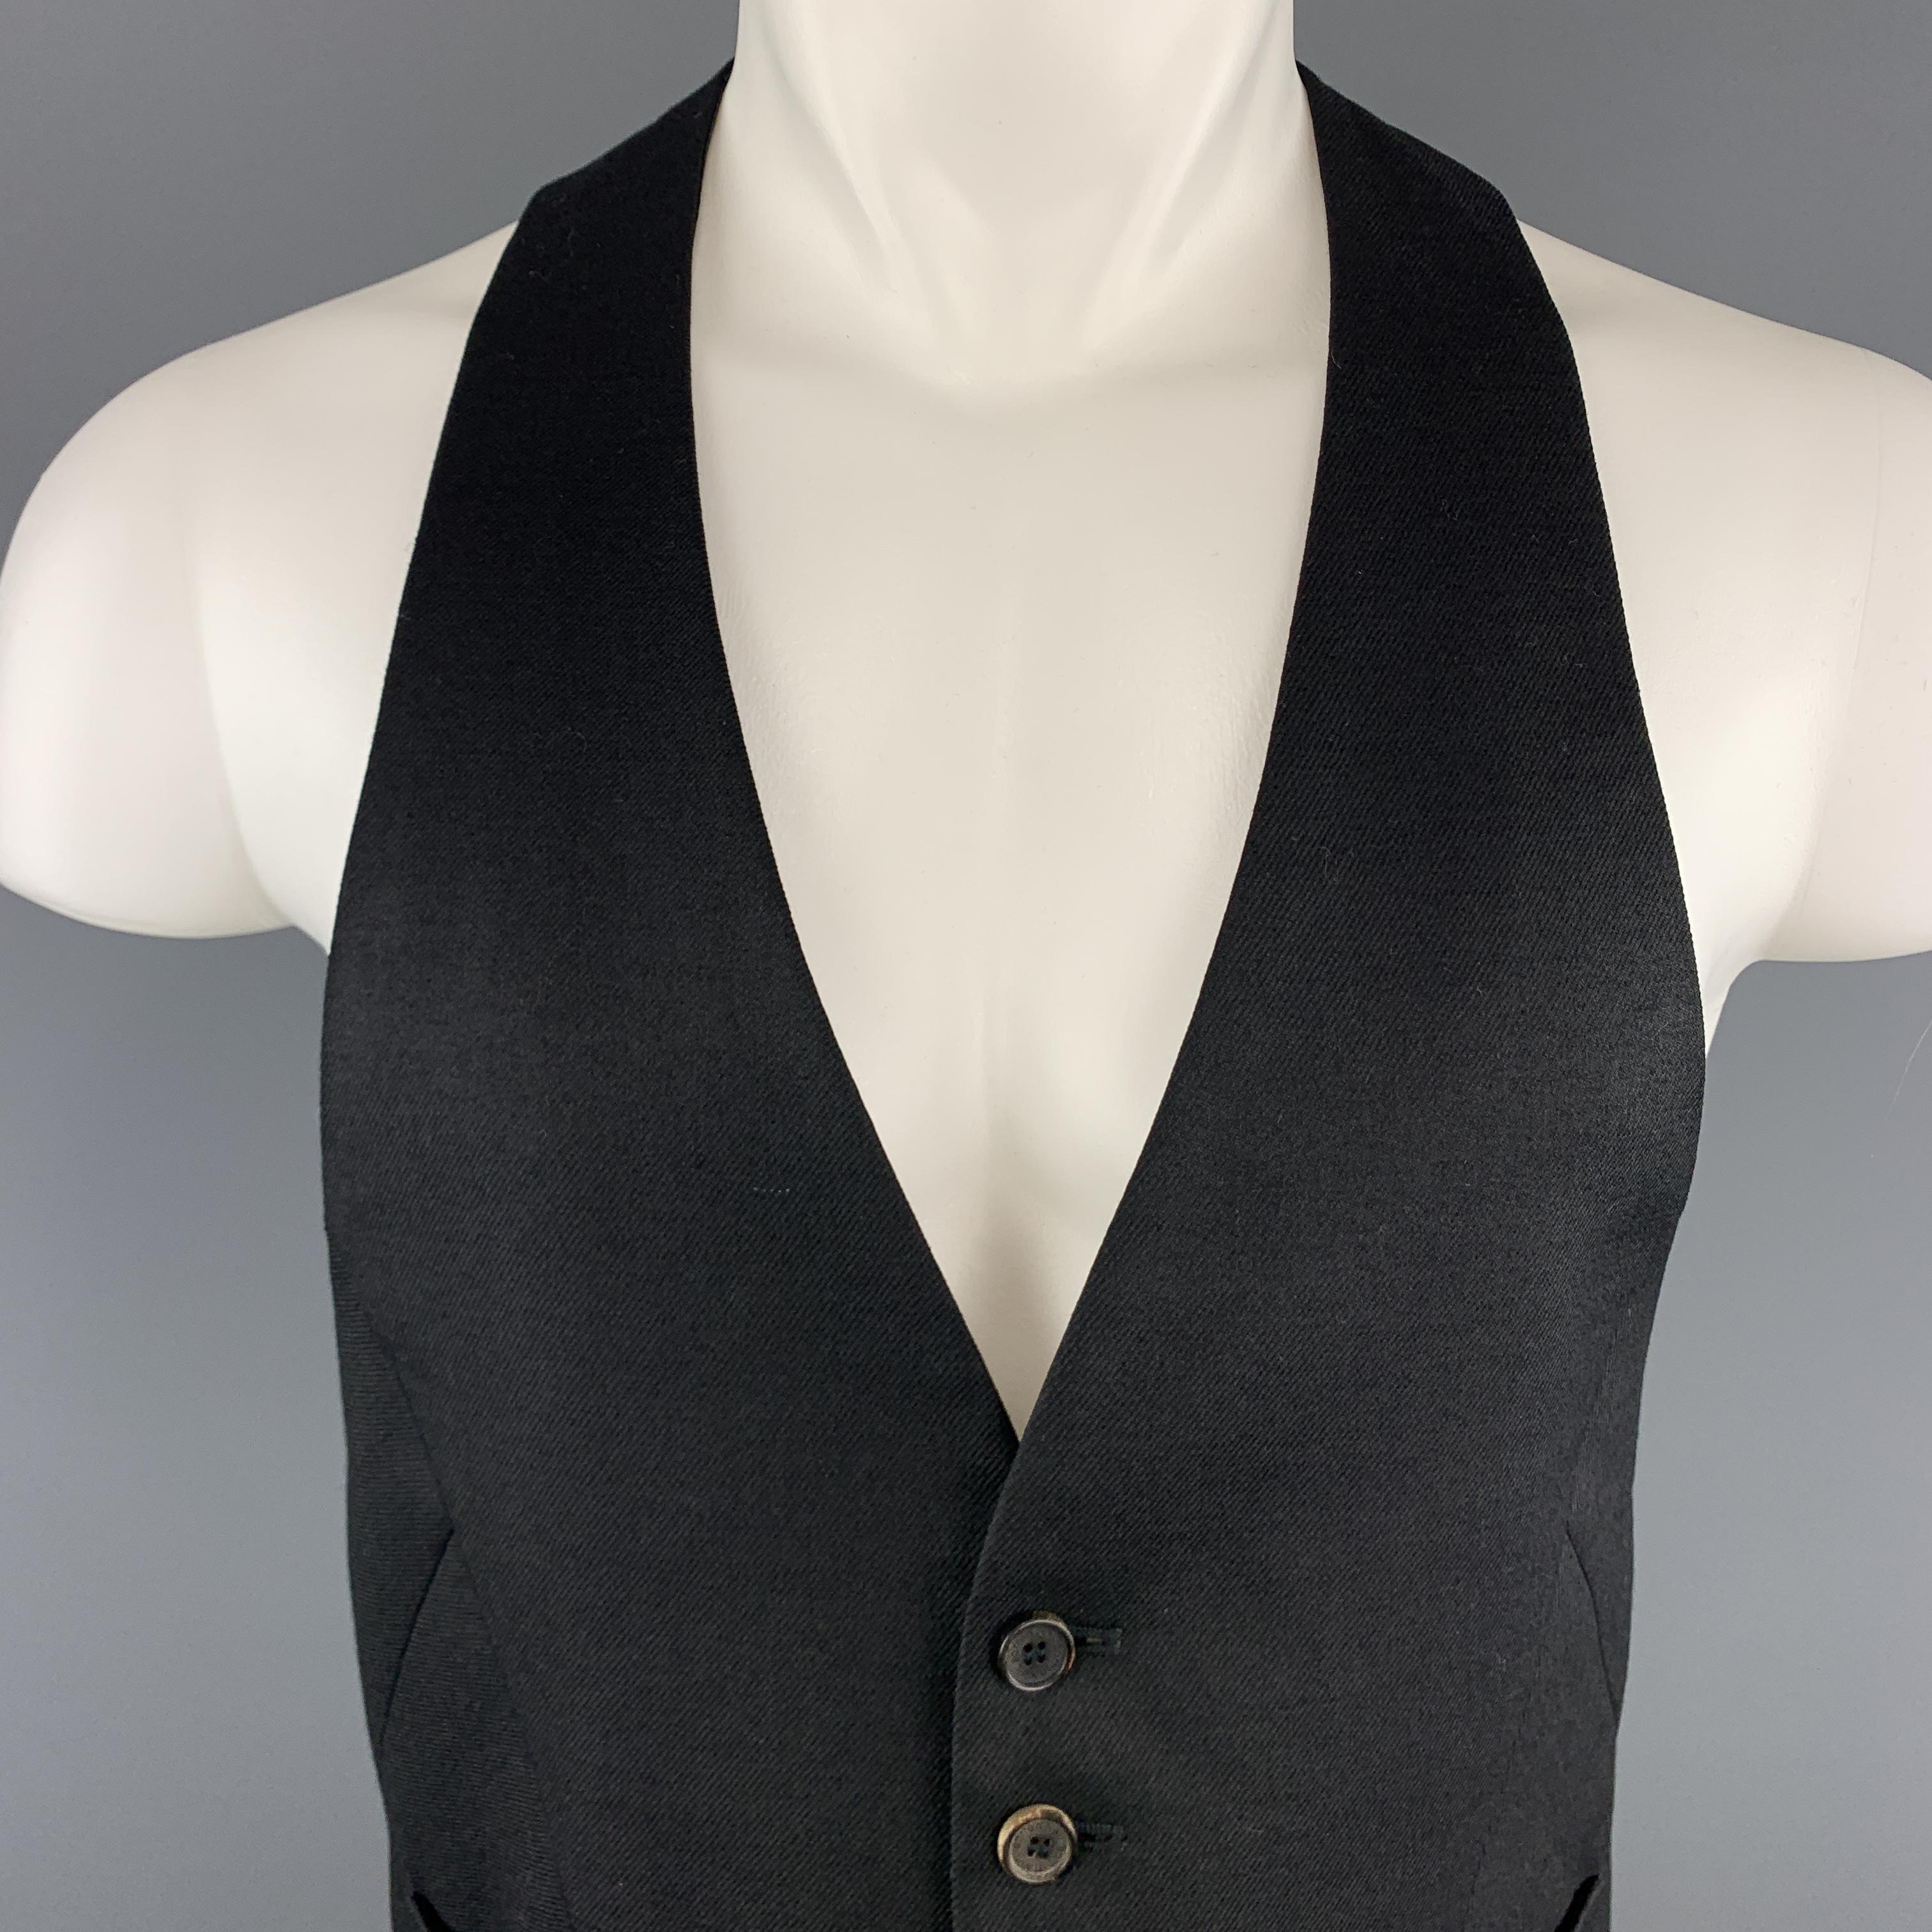 NEIL BARRETT vest comes in black wool twill with a deep V neck front, slanted cut front, and racer cut harness belt buckle back. Made in Italy.

Excellent Pre-Owned Condition.
Marked: IT 48

Measurements:

Shoulder: 9.25 in.
Chest: 38 in.
Length: 25